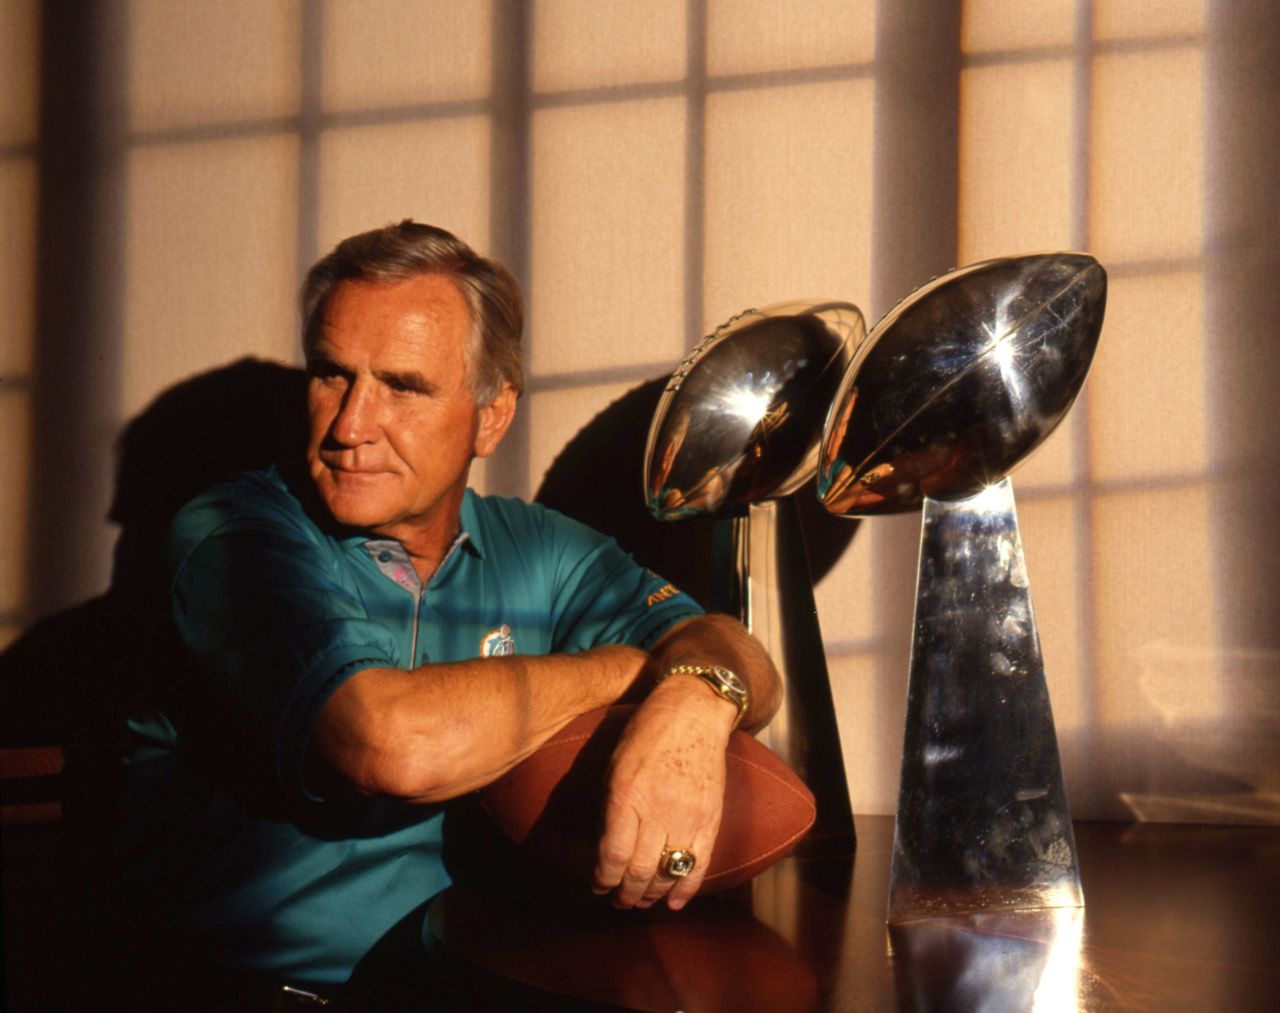 <a href="https://www.cnn.com/2020/05/04/us/don-shula-miami-dolphins-coach-obit-spt/index.html" target="_blank">Don Shula</a>, the longtime Miami Dolphins coach and architect of the only perfect season in NFL history, died May 4 at age 90. Though he spent several seasons in the NFL as a player and served as head coach of the Baltimore Colts, he is best known for his quarter-century at the helm of the Miami Dolphins. He won more games than any head coach in NFL history.